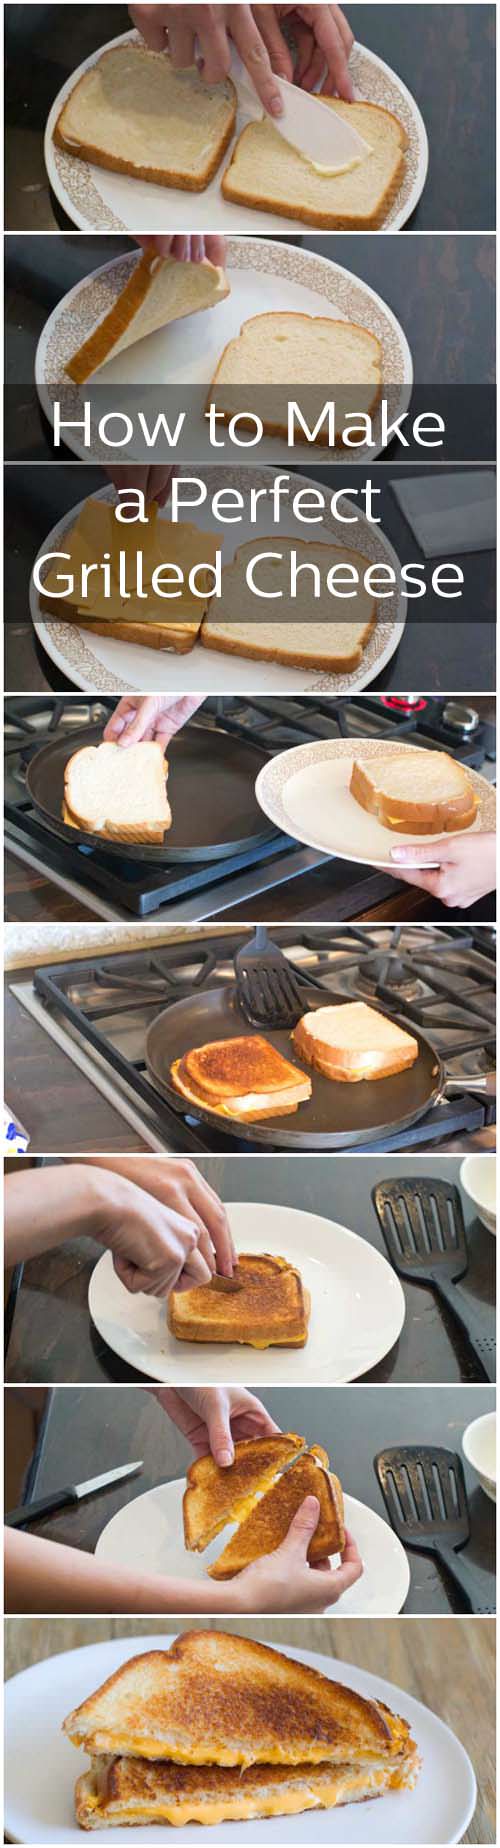 How To Make a Classic Grilled Cheese